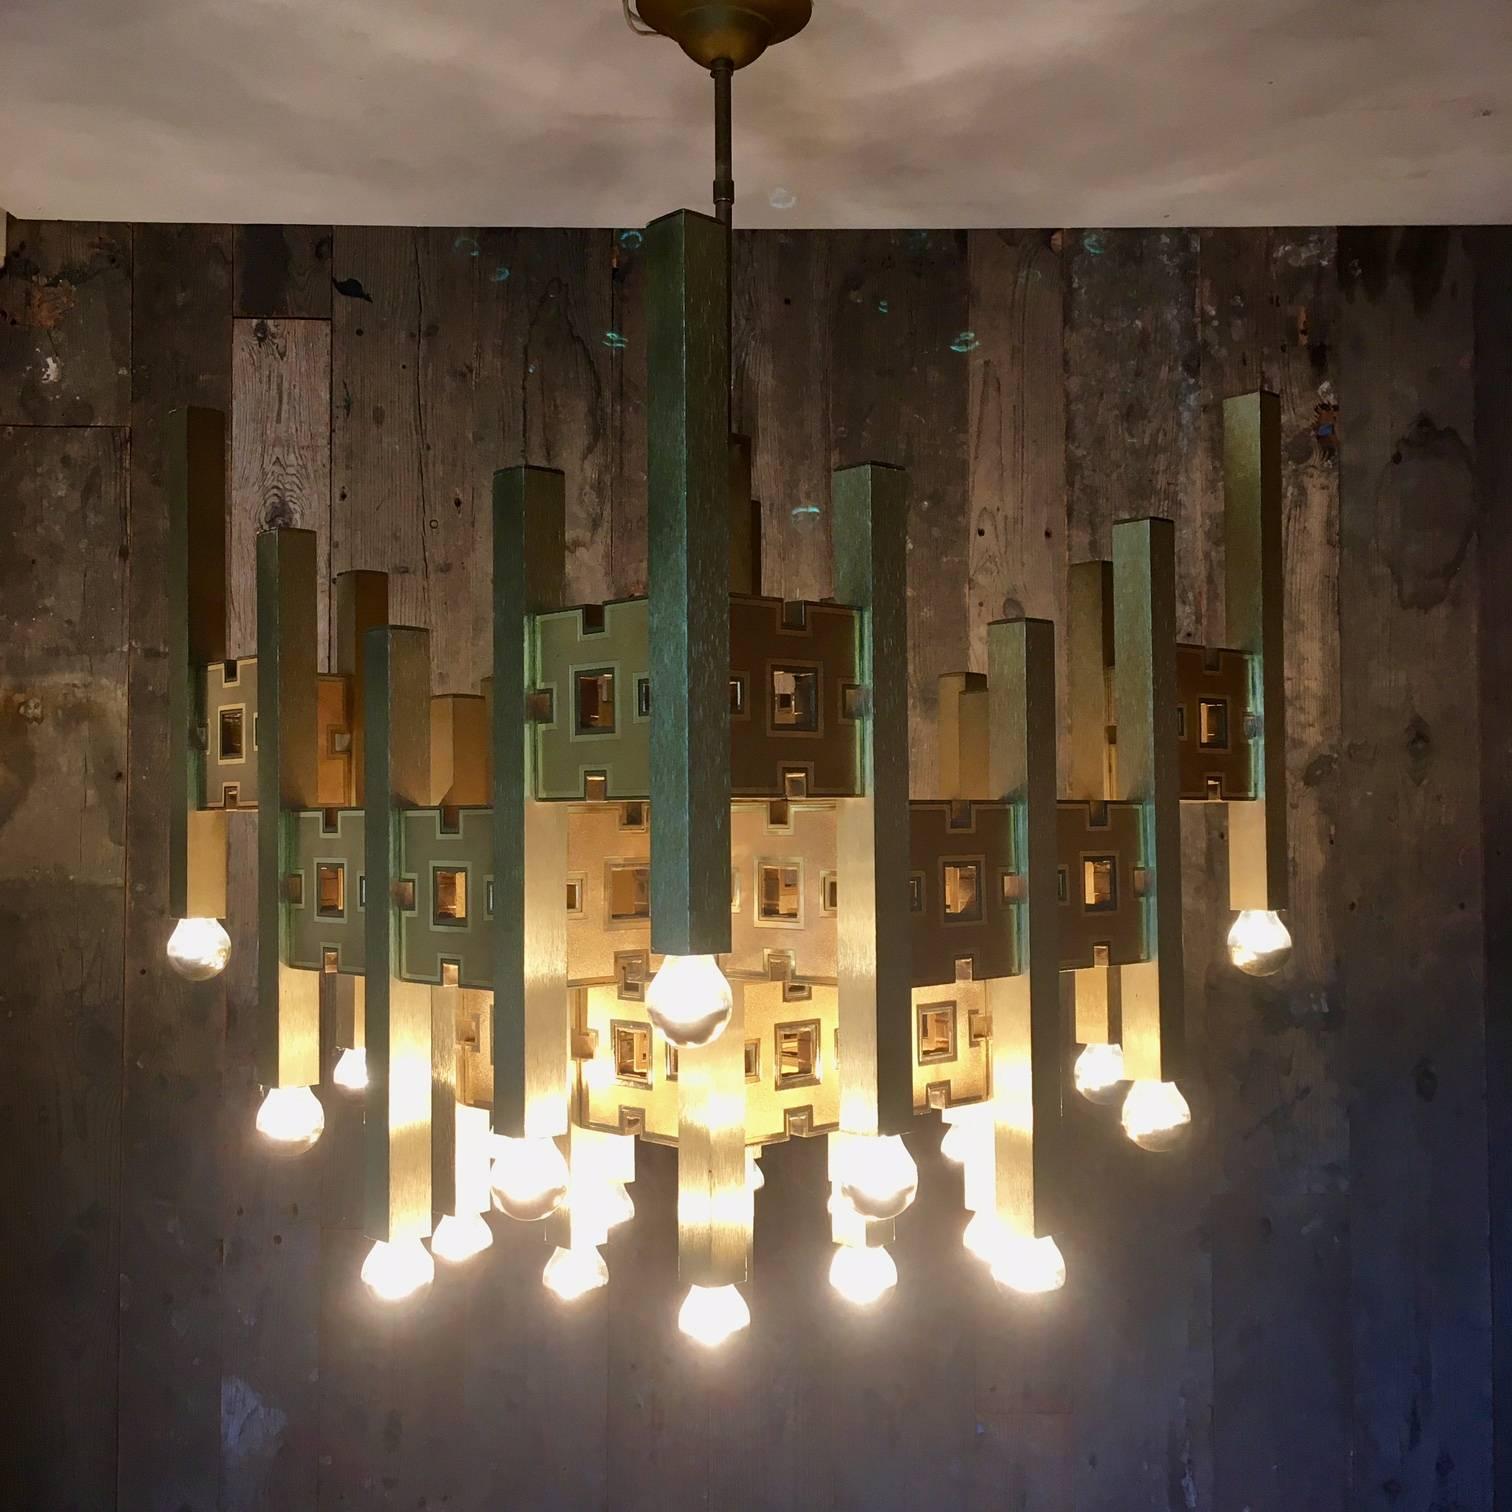 Spectacular brass modernist twenty-four lights chandelier by Gaetano Sciolari.
Made out of brass cubes and rectangular shapes. Measures: Square shaped 59 x 59 cm. Height excluding bar 65 cm. 

Angelo Gaetano Sciolari (1927-1994) was a movie